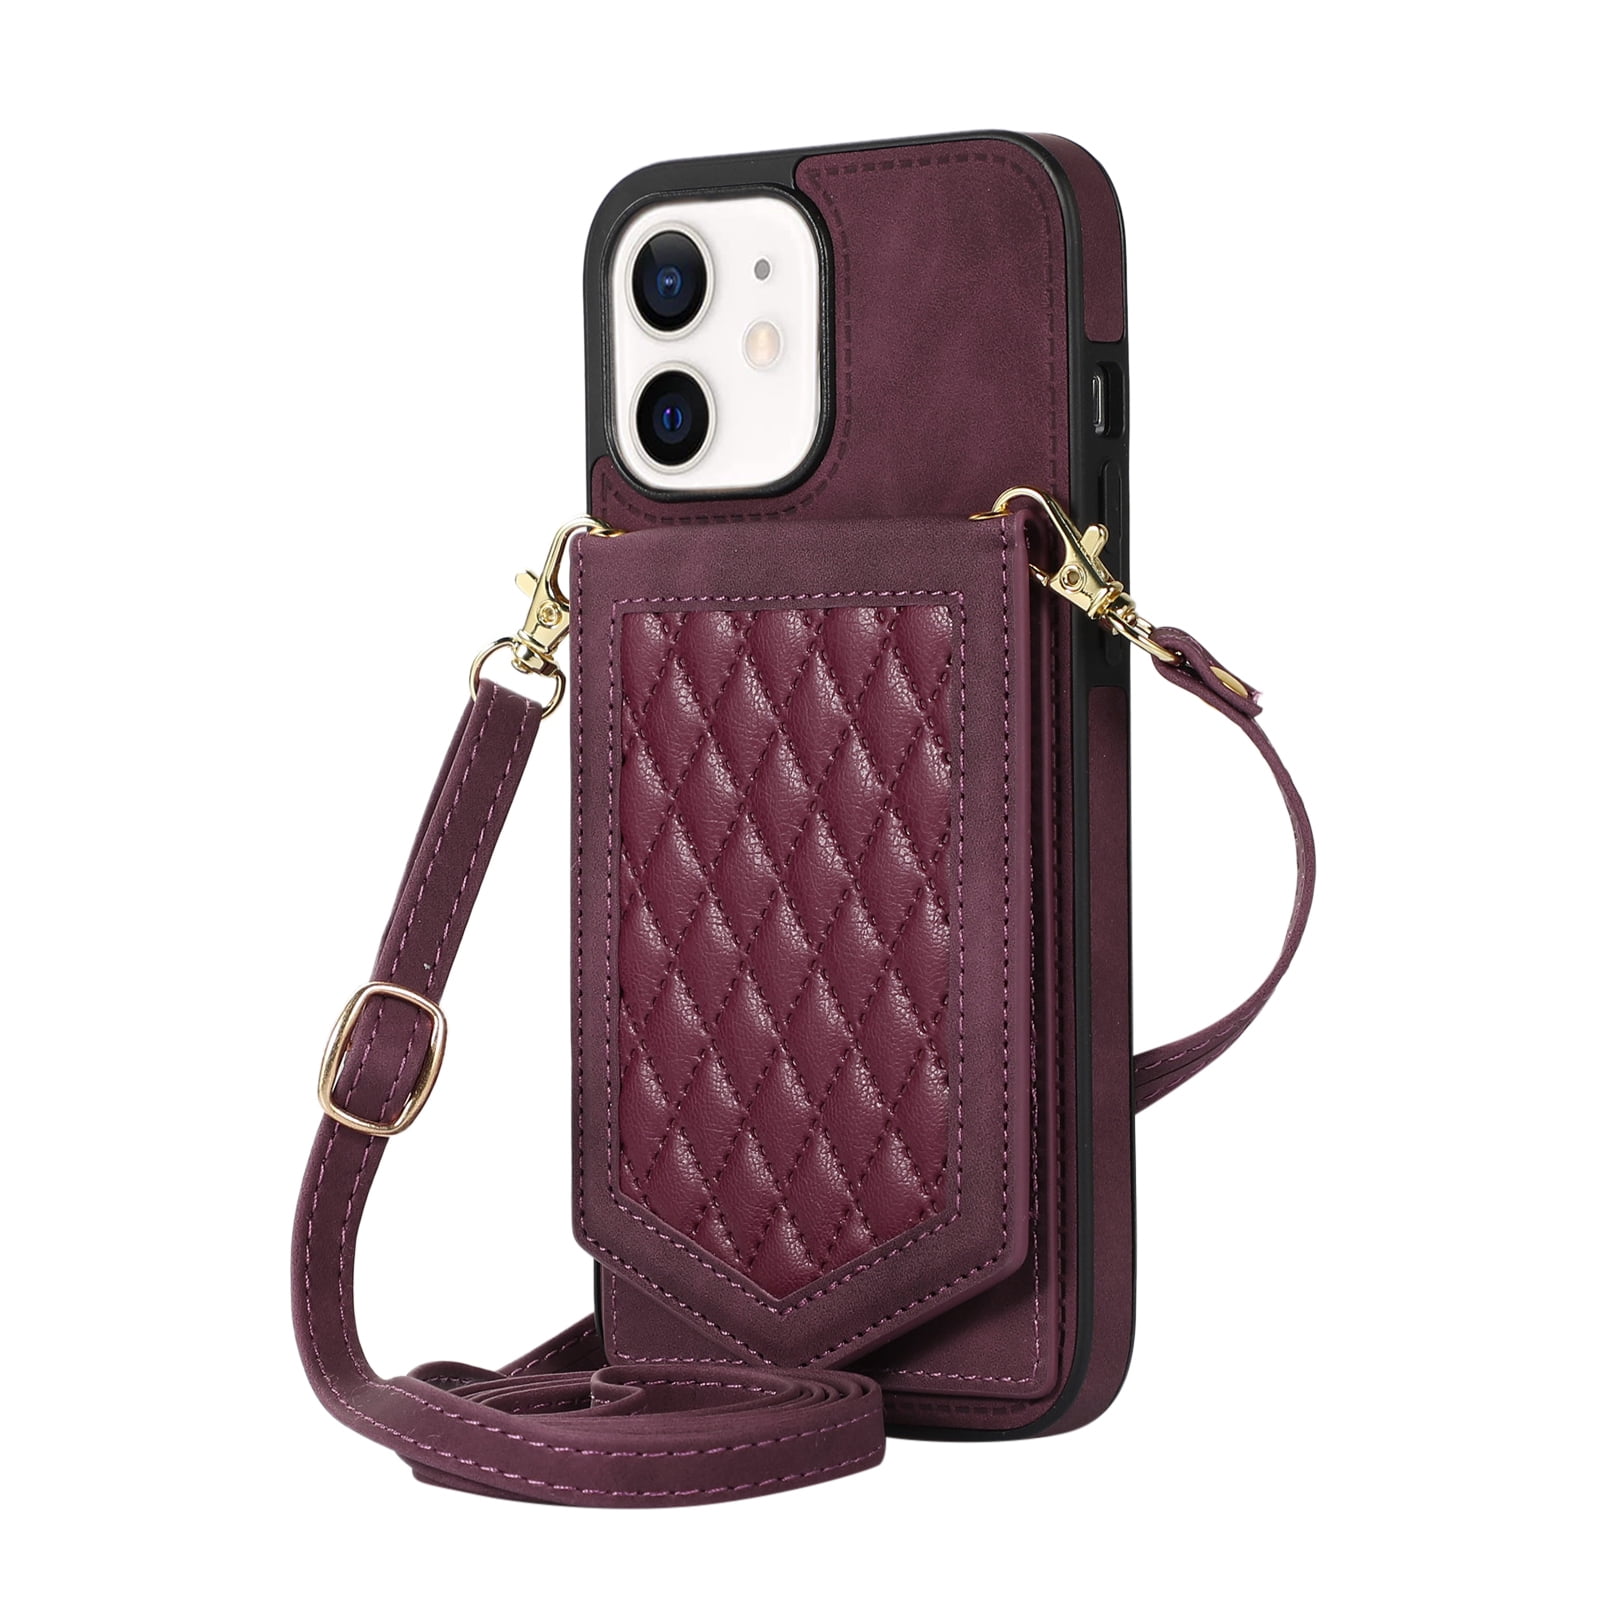 Dteck Crossbody Wallet Case for iPhone 11 with RFID Blocking Card